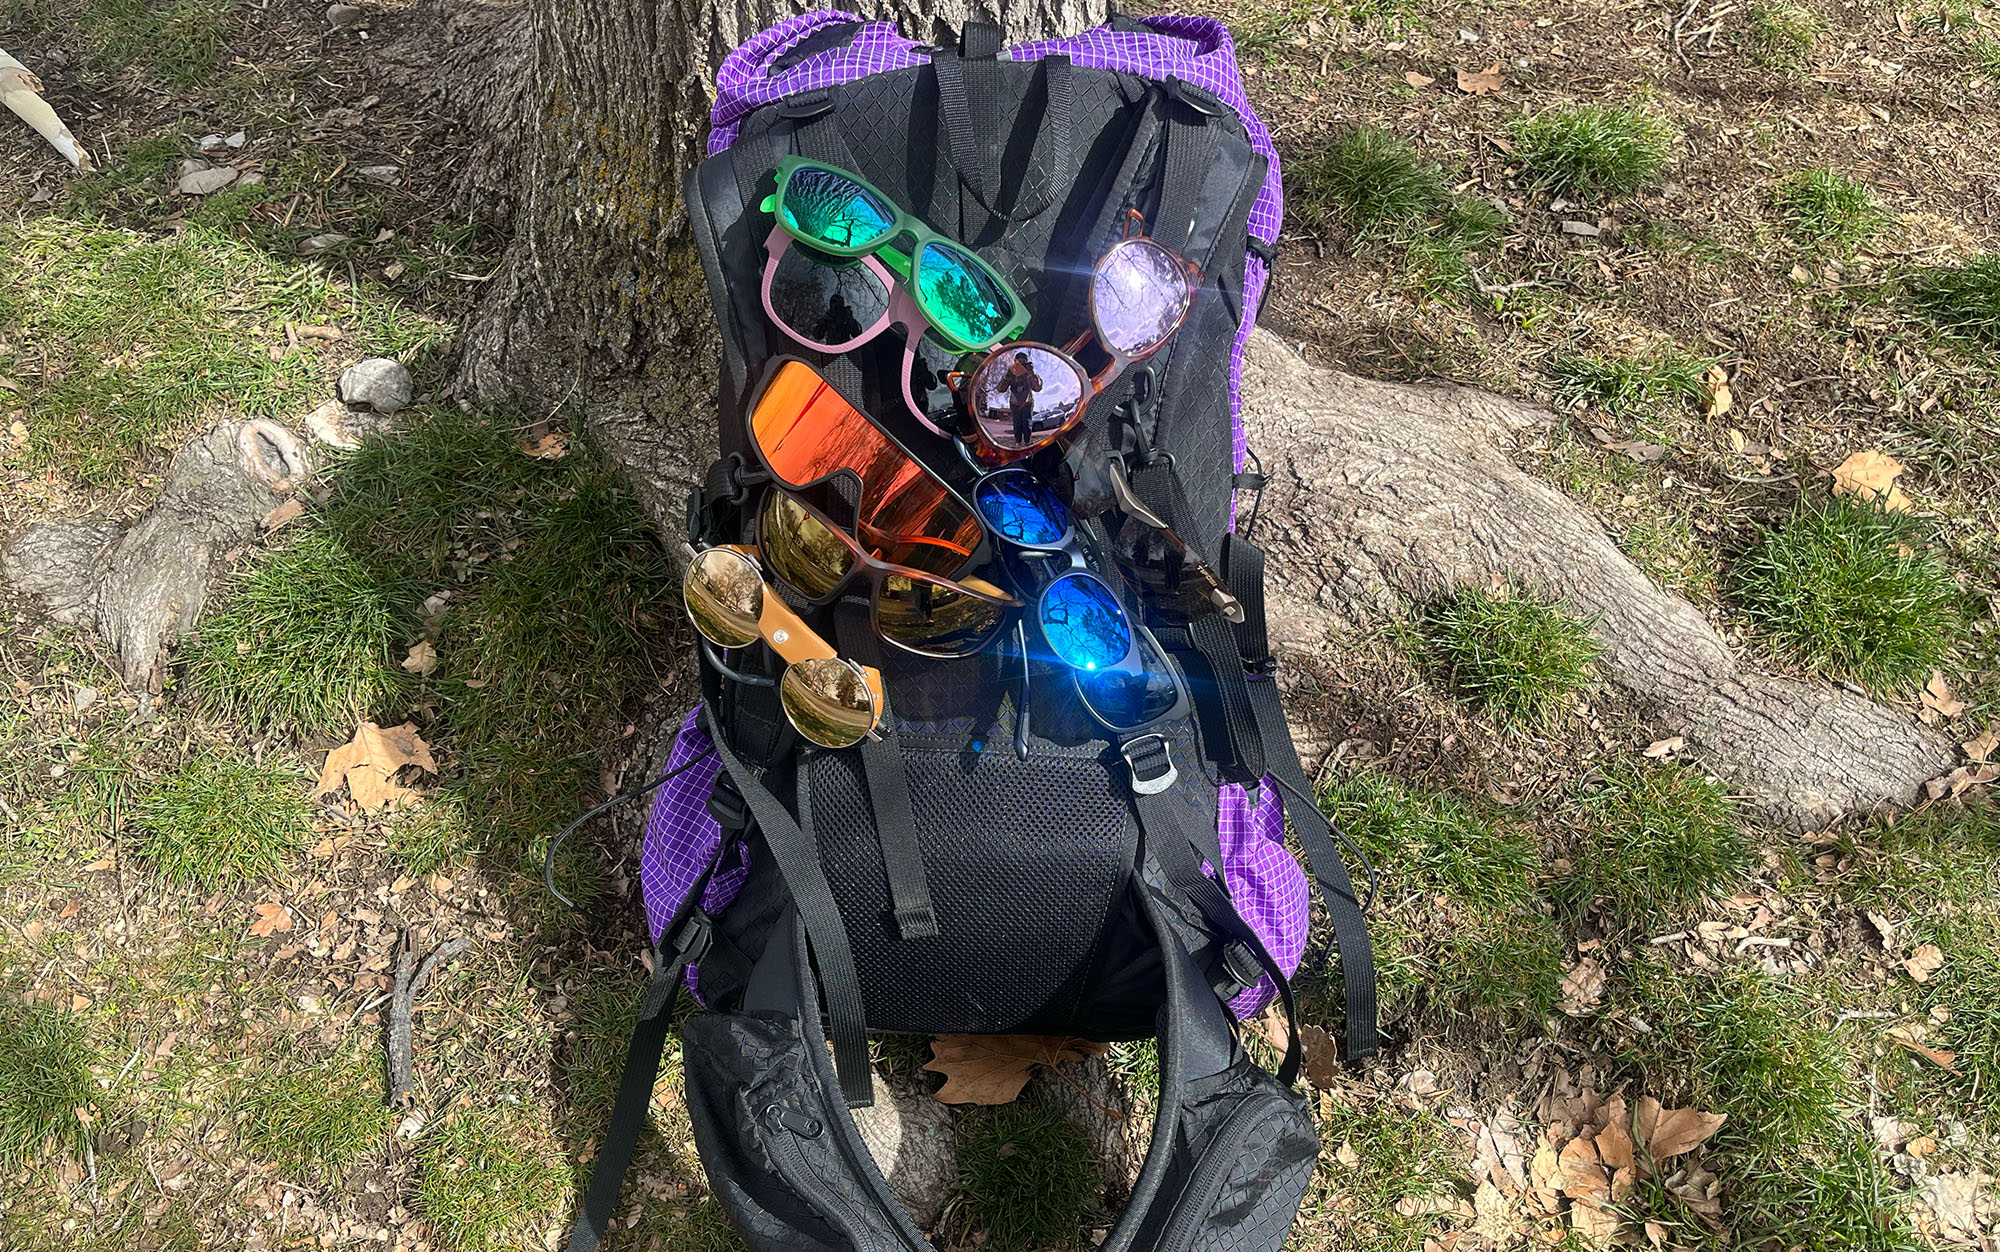 Best Hiking Sunglasses of 2023, Tested and Reviewed